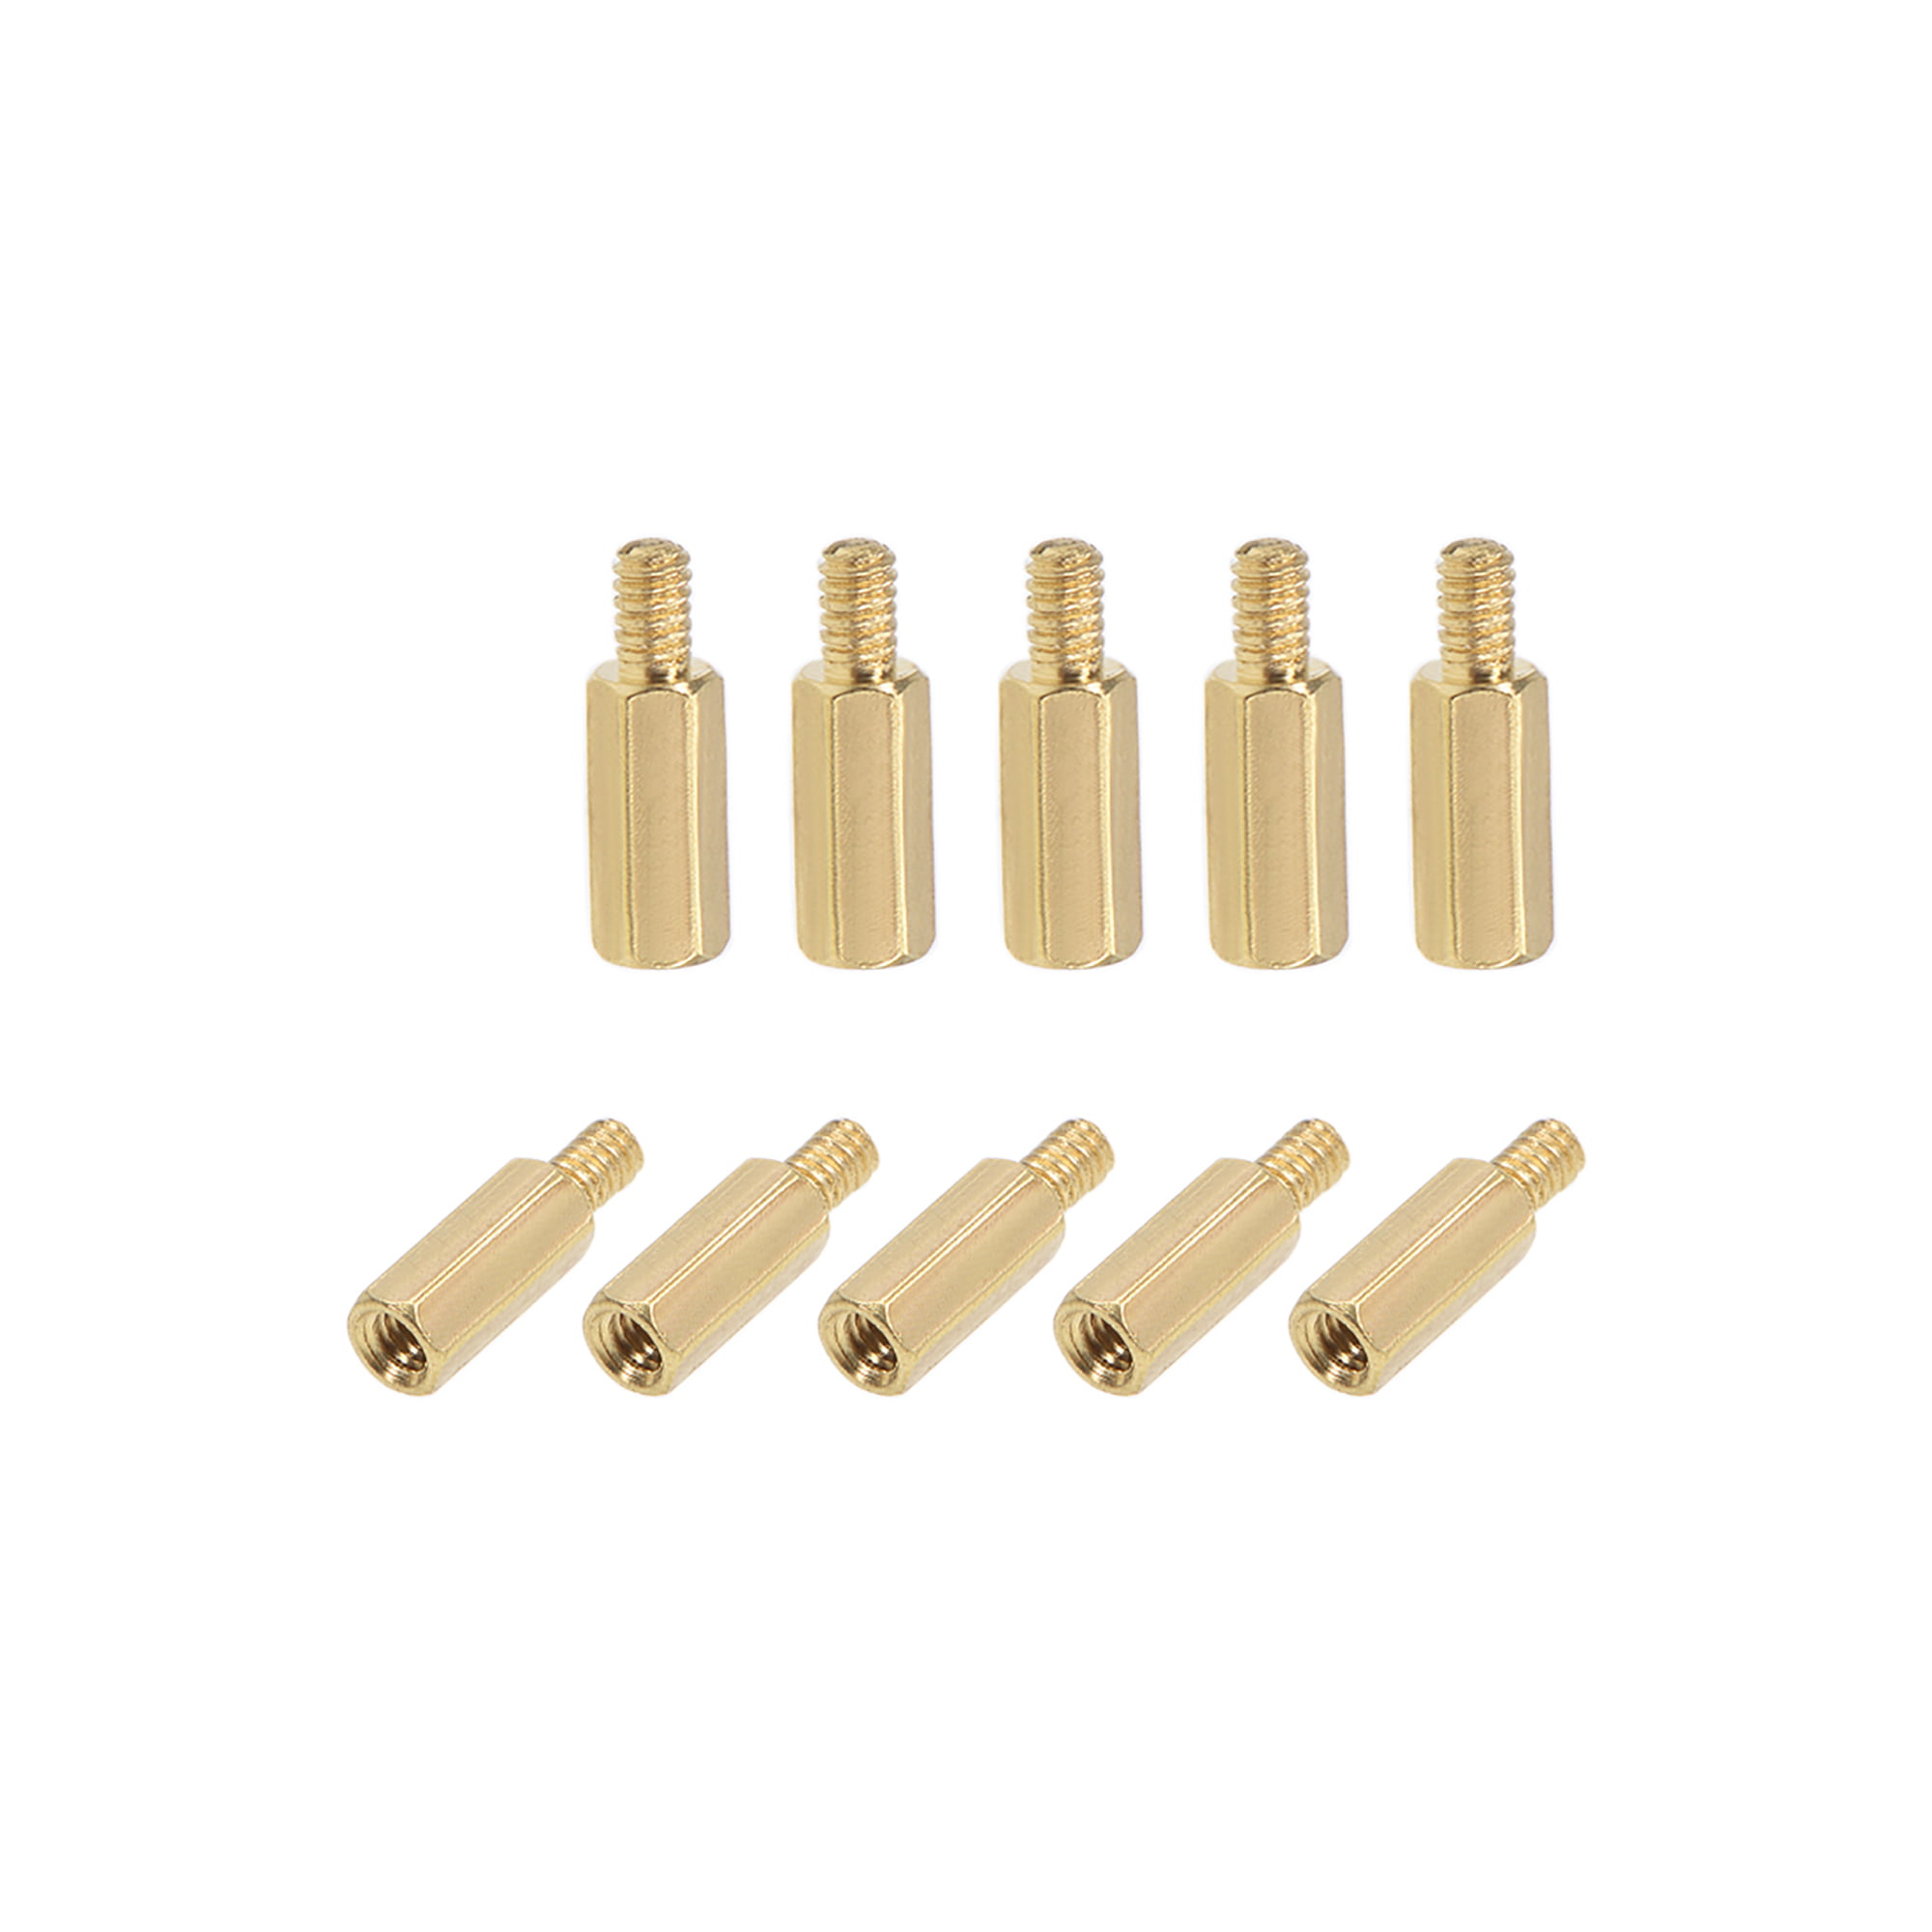 M2.5 x 13 mm 6 mm Male to Female Hex Brass Spacer Standoff 50pcs 